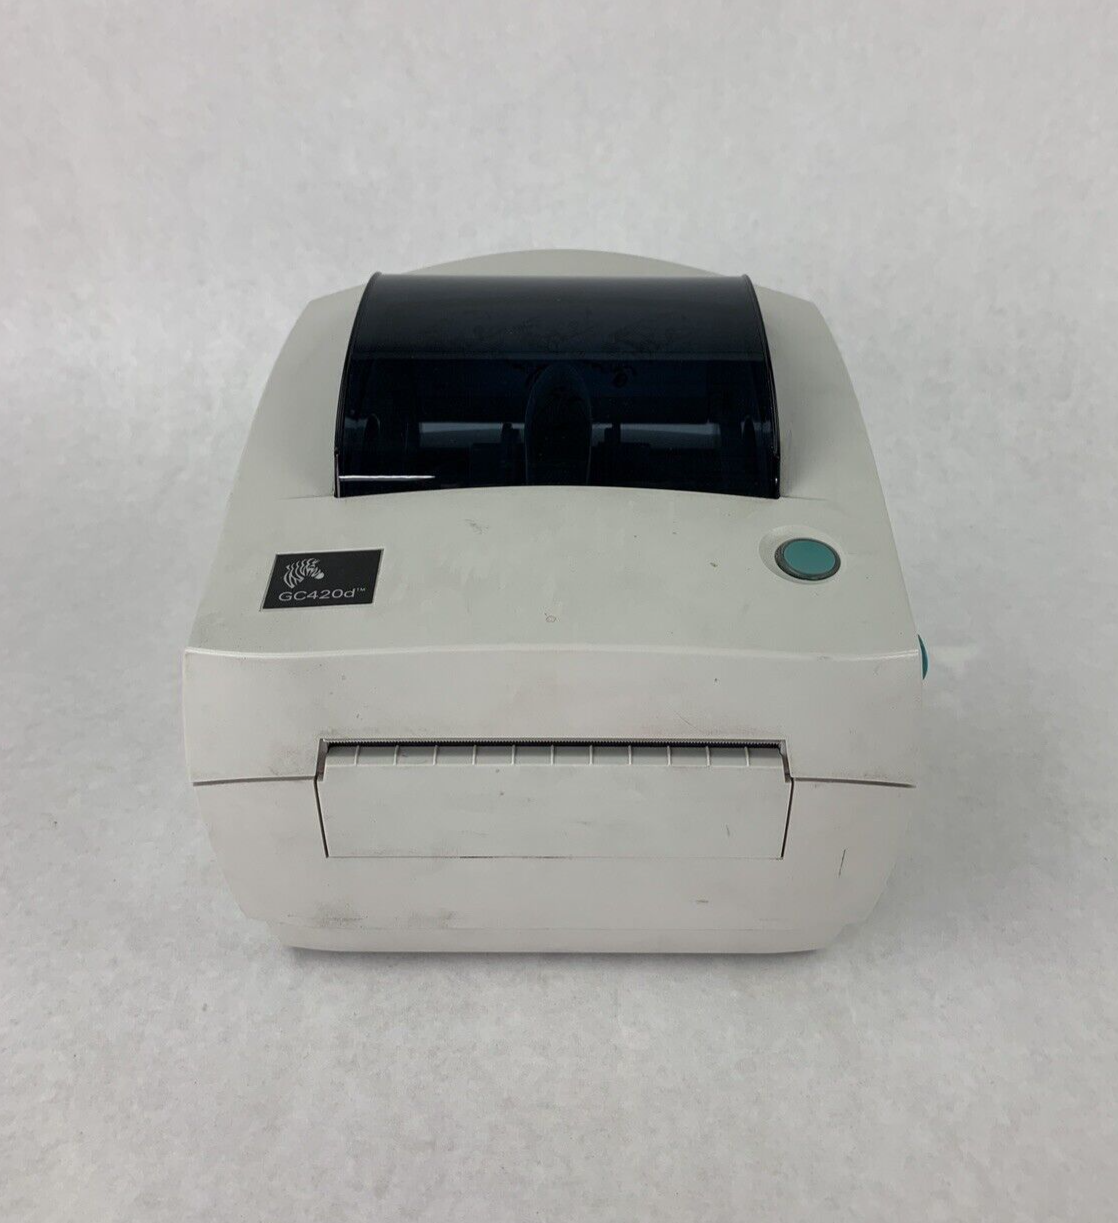 Zebra GC420D Direct Thermal USB Serial Label Printer Tested Bad Ports Parts